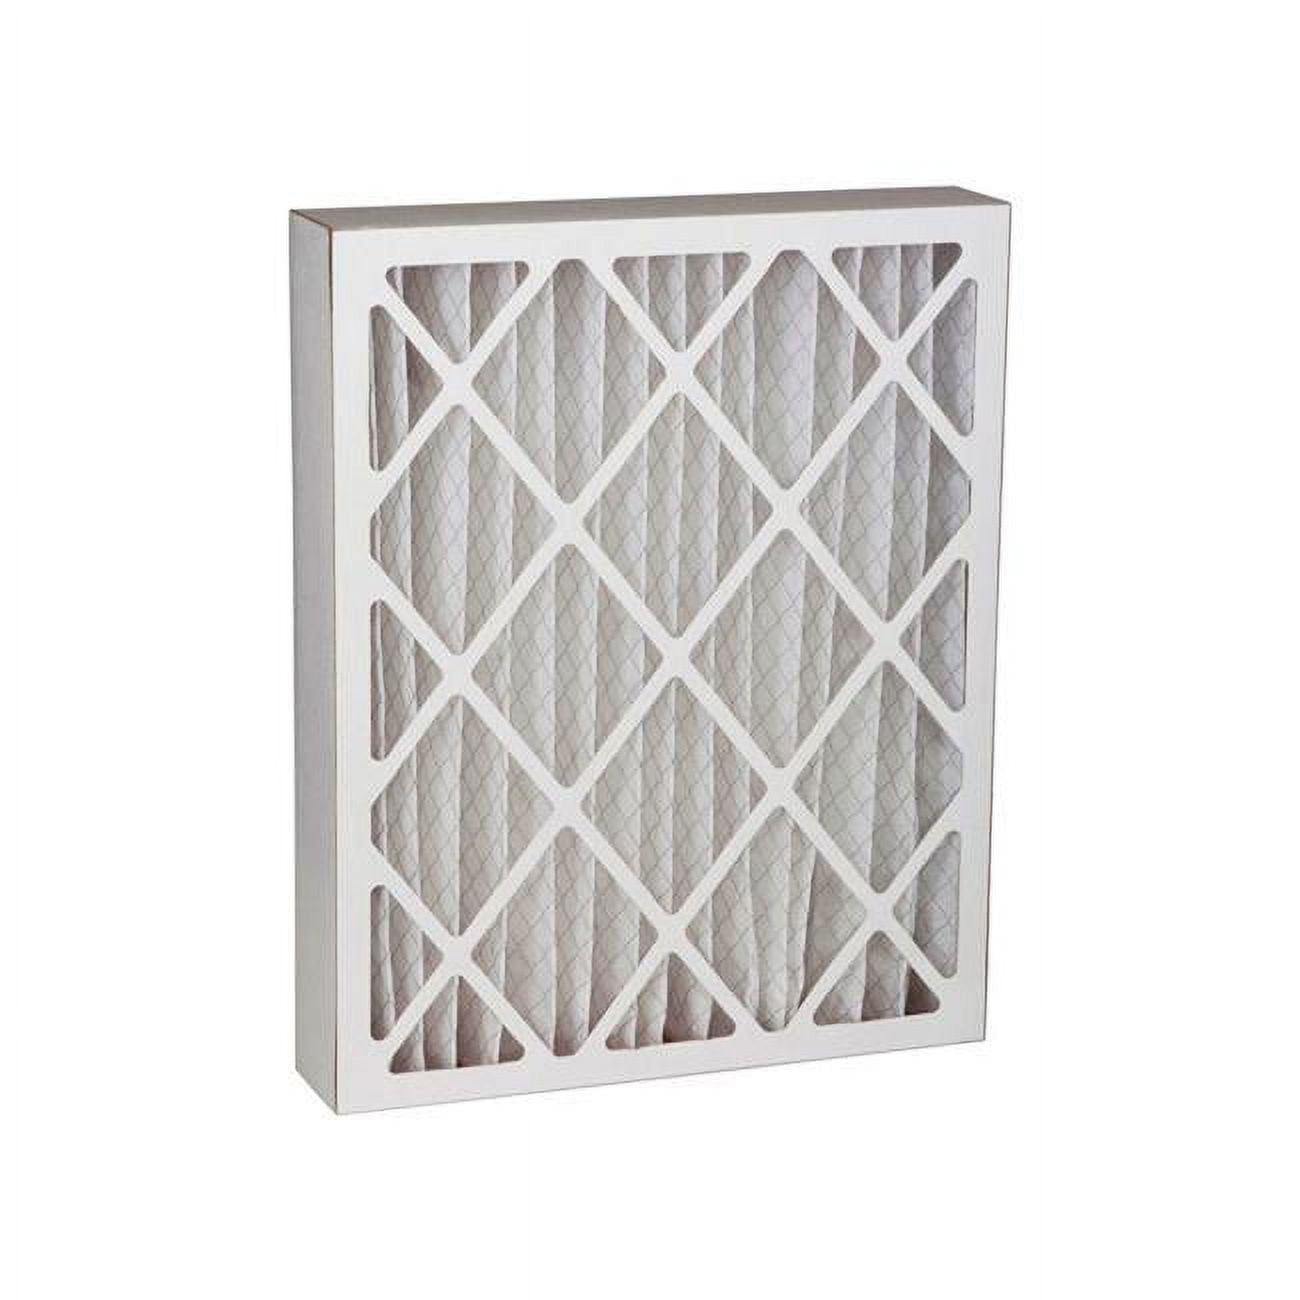 Picture of Bestair 4822904 24 x 20 x 4 in. 8 MERV Pleated Air Filter - Case of 3